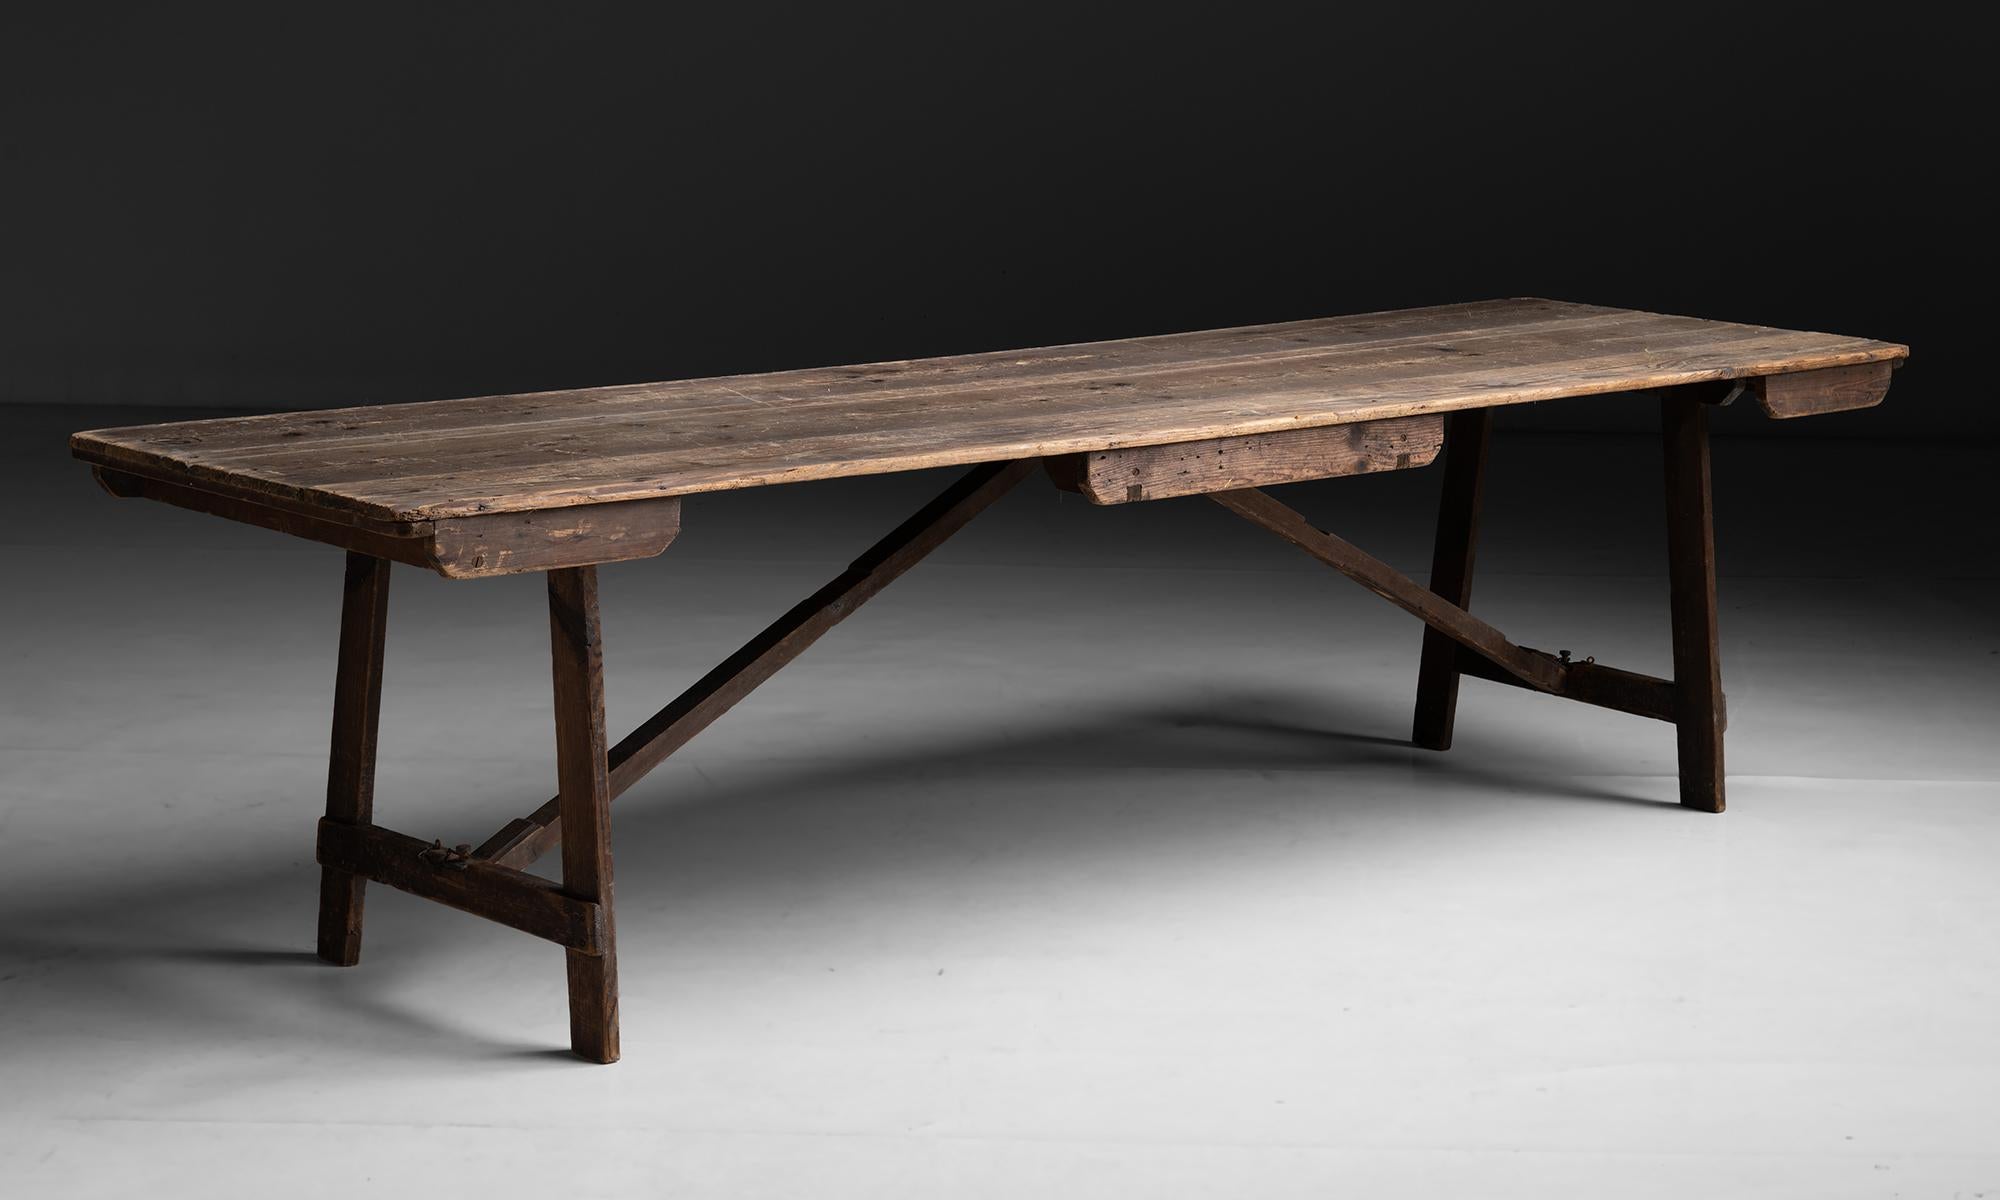 Folding Table

England circa 1890

Composed of pine.

Measures 107.25”L x 31.75”d x 27.75”h